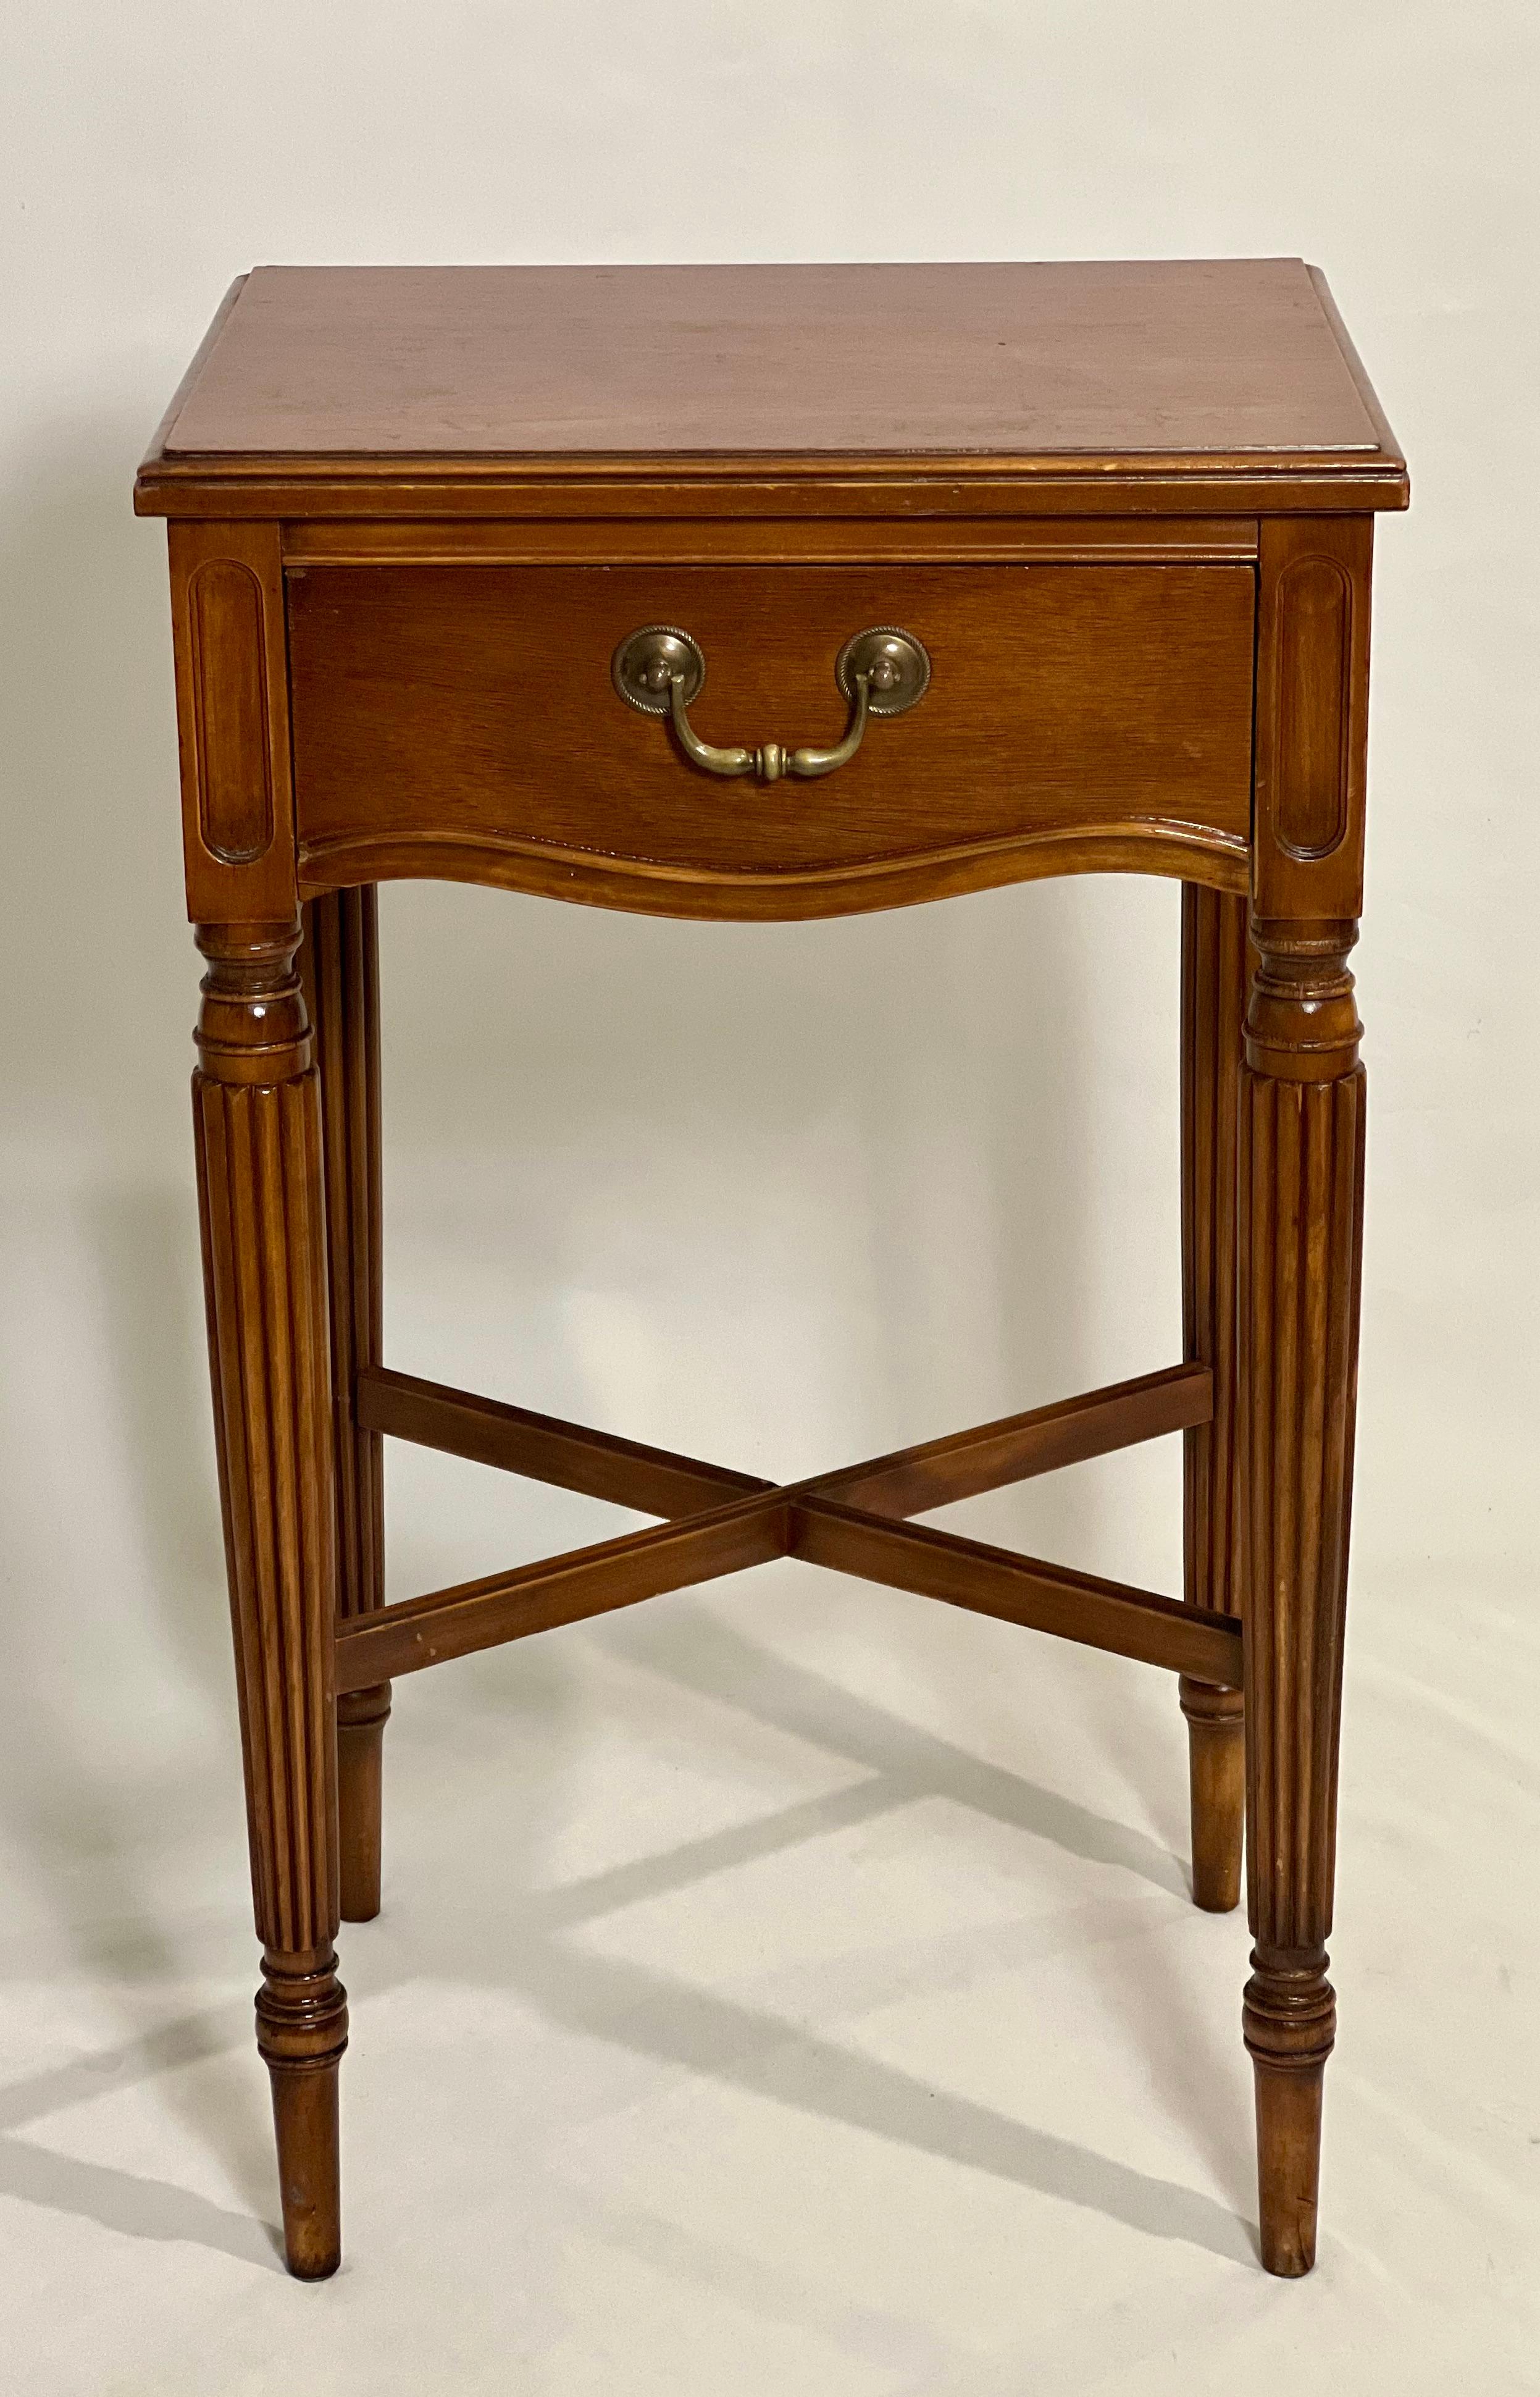 Louis XVI style walnut side table or stand by Berkey and Gay, c. 1920.

Stately table with a single dovetailed drawer with brass pull, fluted legs, cross stretcher and a finished back.  The table is beautifully crafted with fine details and has a